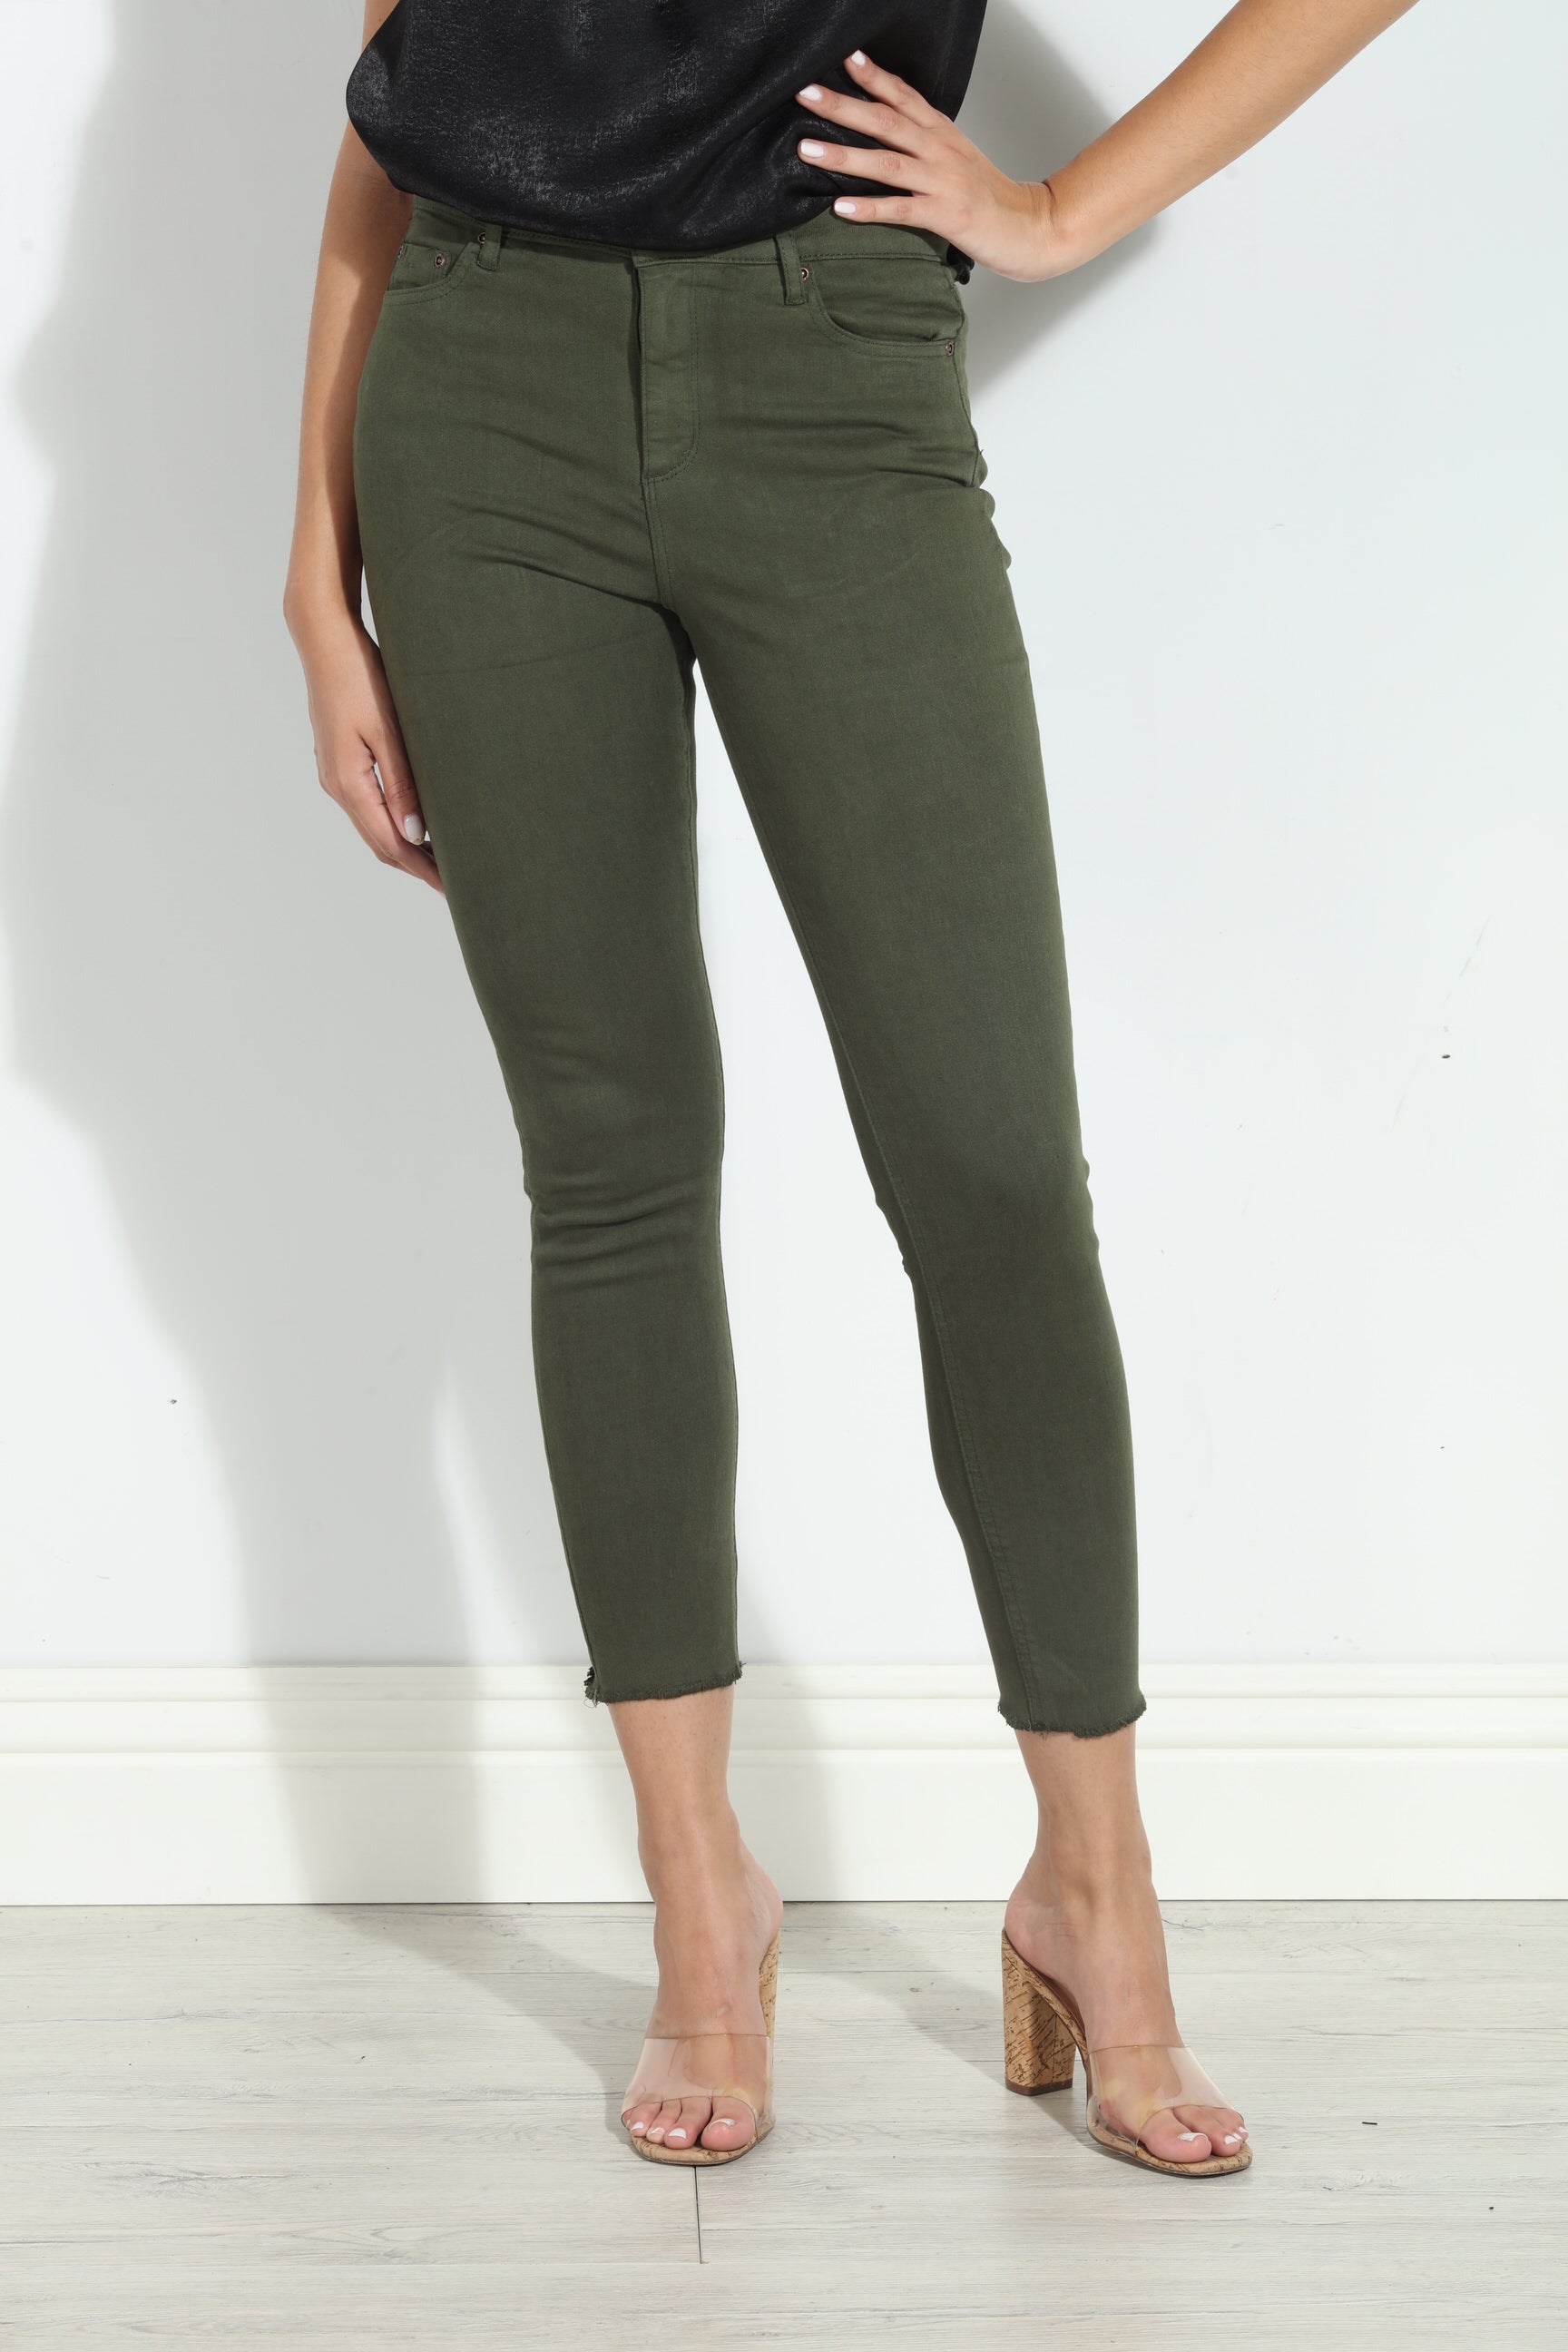 Tractr Mona High Rise Crop Fray Jeans - Olive